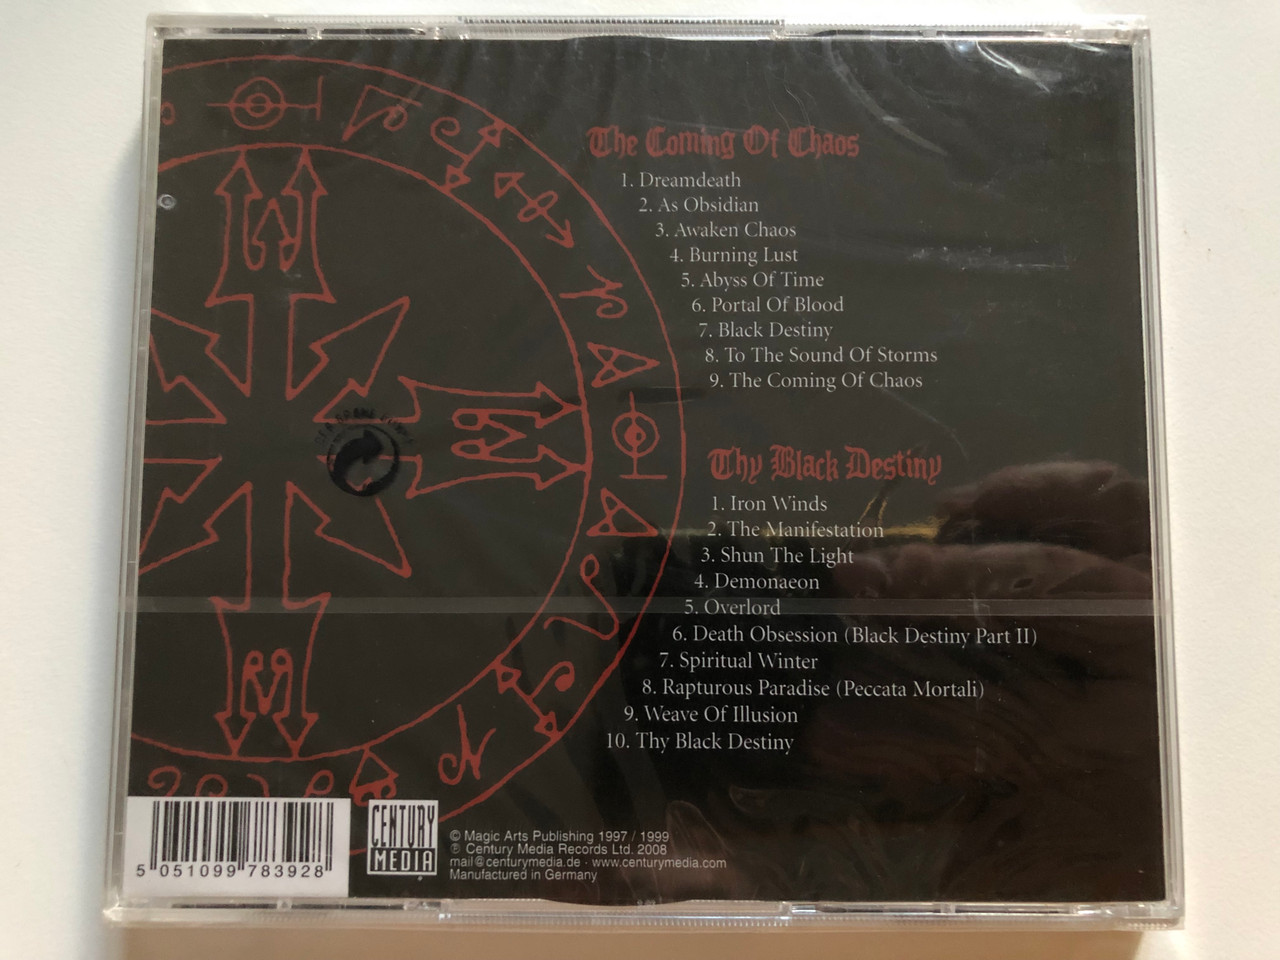 https://cdn10.bigcommerce.com/s-62bdpkt7pb/products/0/images/261037/Sacramentum_Abyss_Of_Time_Awarded_to_the_owner_of_this_CD._For_excellent_musical_taste_and_humble_dedication_to_the_ancient_death_metal_cult._Limited_Edition_with_black_discs_Century_M__60358.1671118590.1280.1280.JPG?c=2&_gl=1*2otwku*_ga*MjA2NTIxMjE2MC4xNTkwNTEyNTMy*_ga_WS2VZYPC6G*MTY3MTEwOTAxNi42NzMuMS4xNjcxMTE4NDE2LjI5LjAuMA..